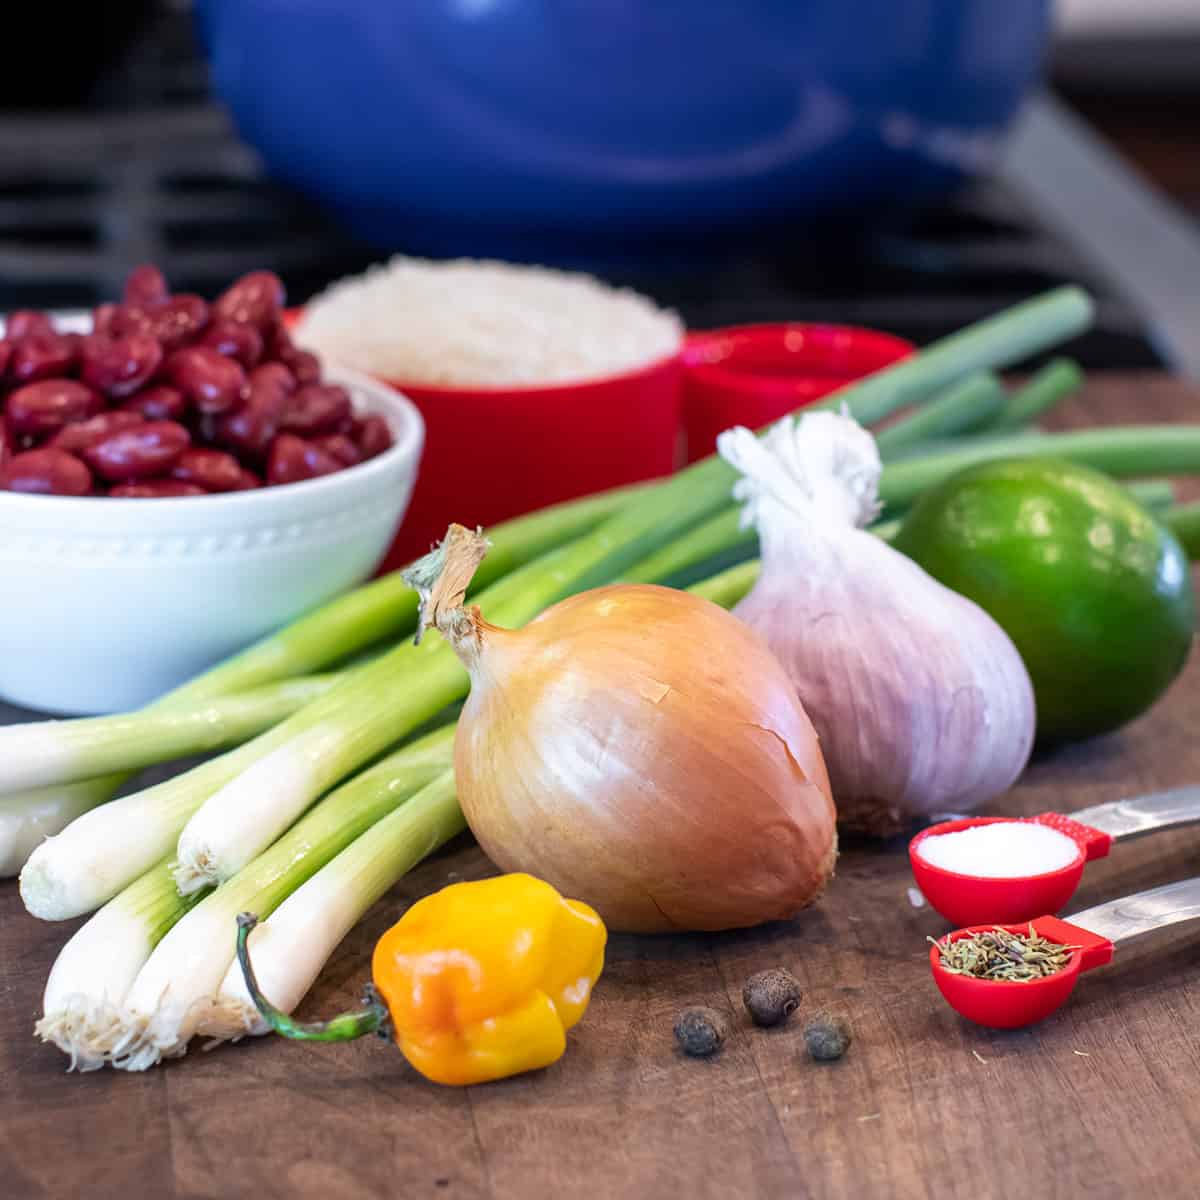 Ingredients for this recipe on a cutting board.